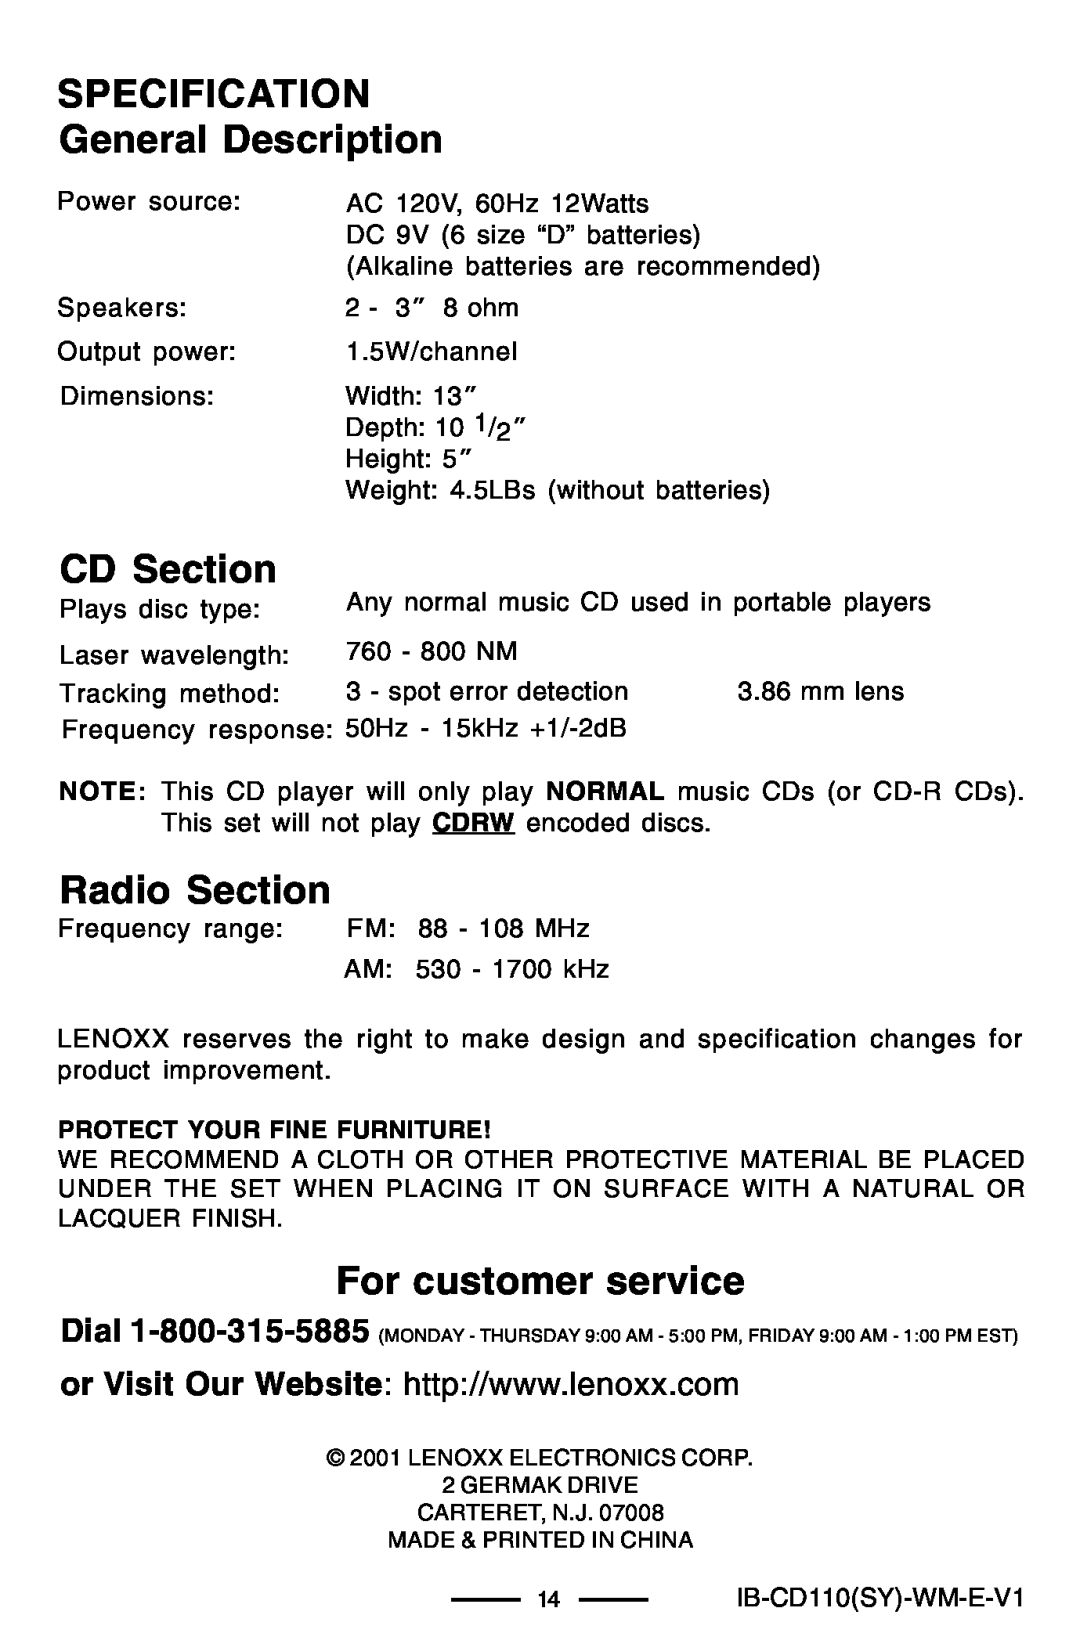 Lenoxx Electronics CD-110 manual SPECIFICATION General Description, CD Section, Radio Section, For customer service 